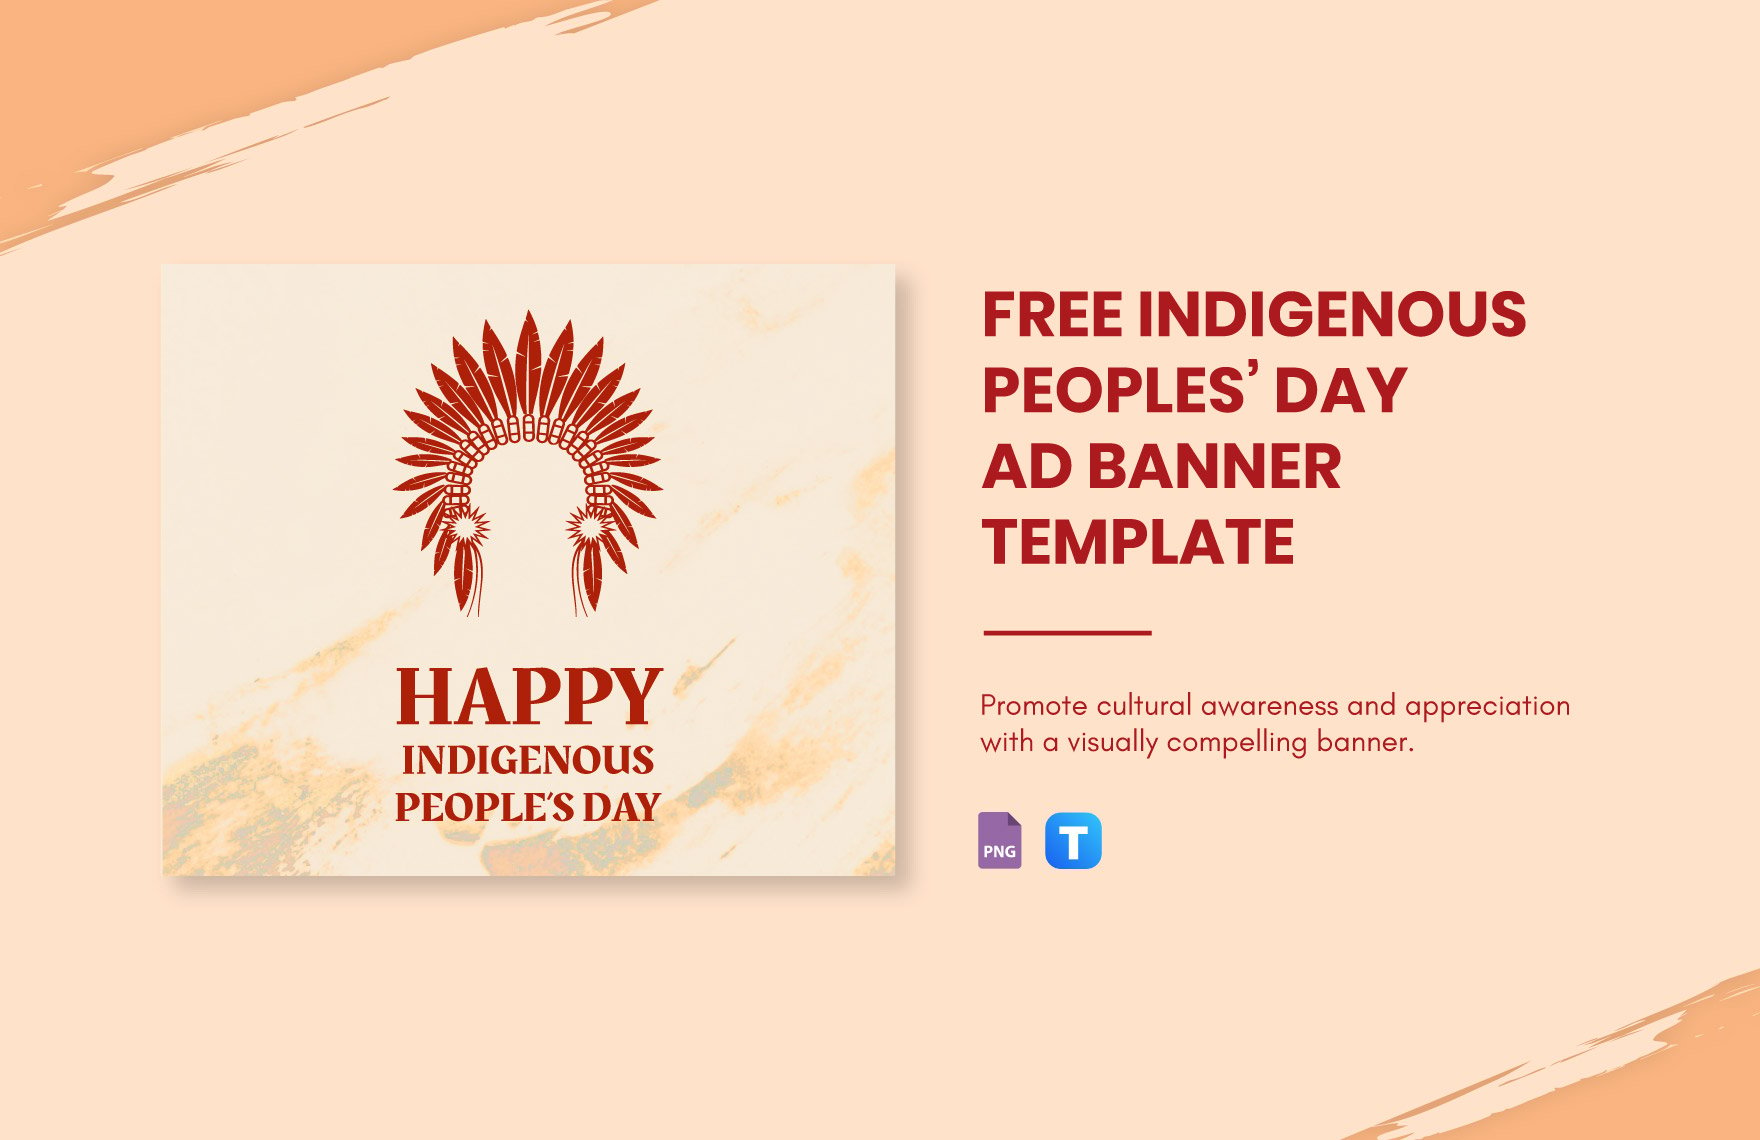 Free Indigenous Peoples' Day Ad Banner Template